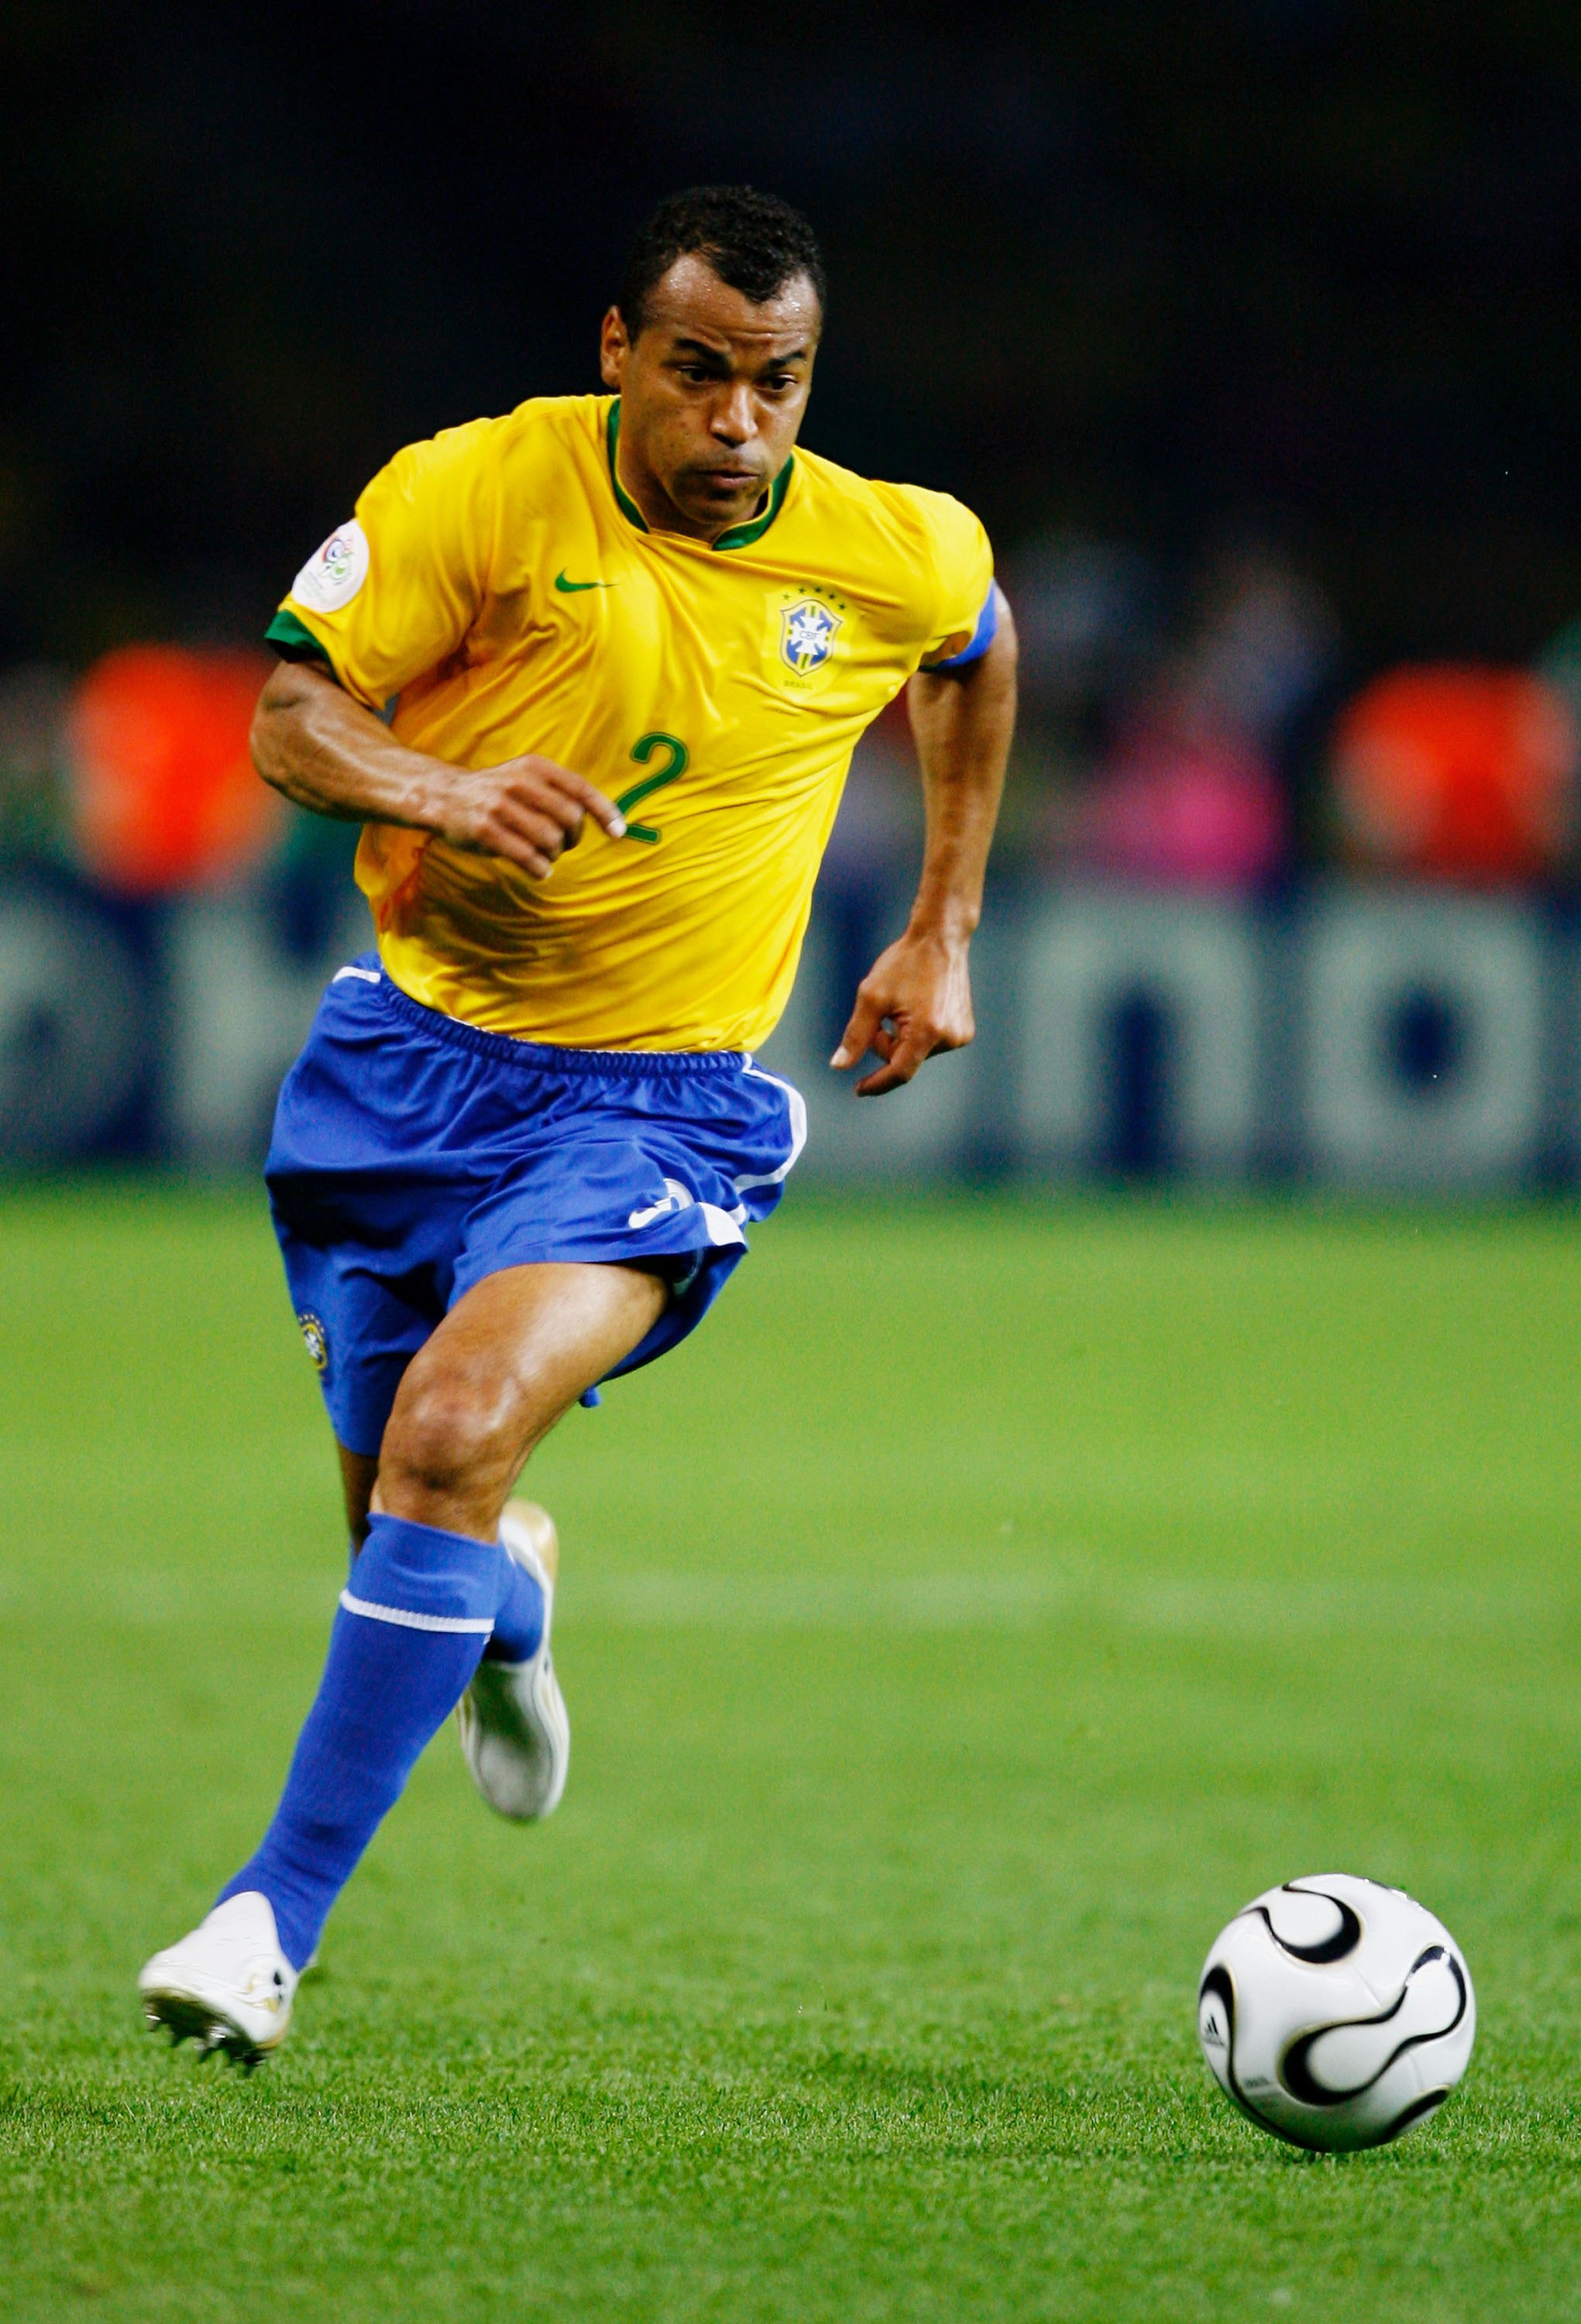 BERLIN - JUNE 13: Cafu of Brazil runs with the ball during the FIFA World Cup Germany 2006 Group F match between Brazil and Croatia played at the Olympic Stadium on June 13, 2006 in Berlin, Germany. (Photo by Shaun Botterill /Getty Images)